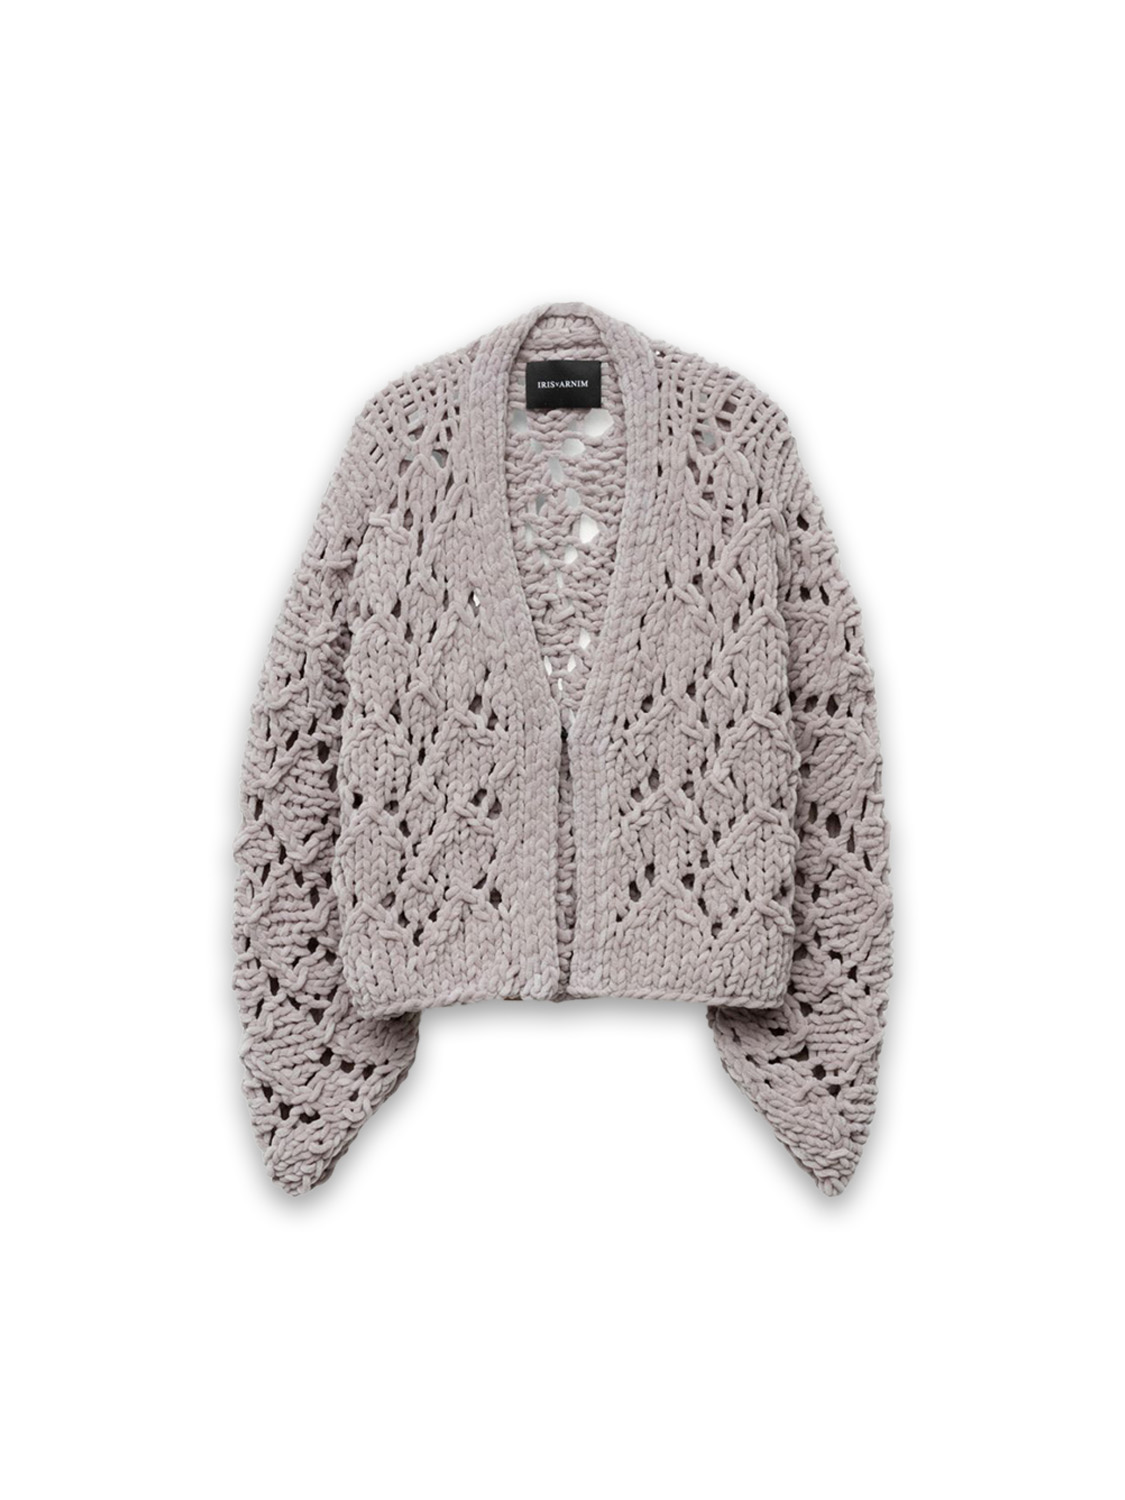 Sade - Short hand-knitted cardigan with ajour pattern 